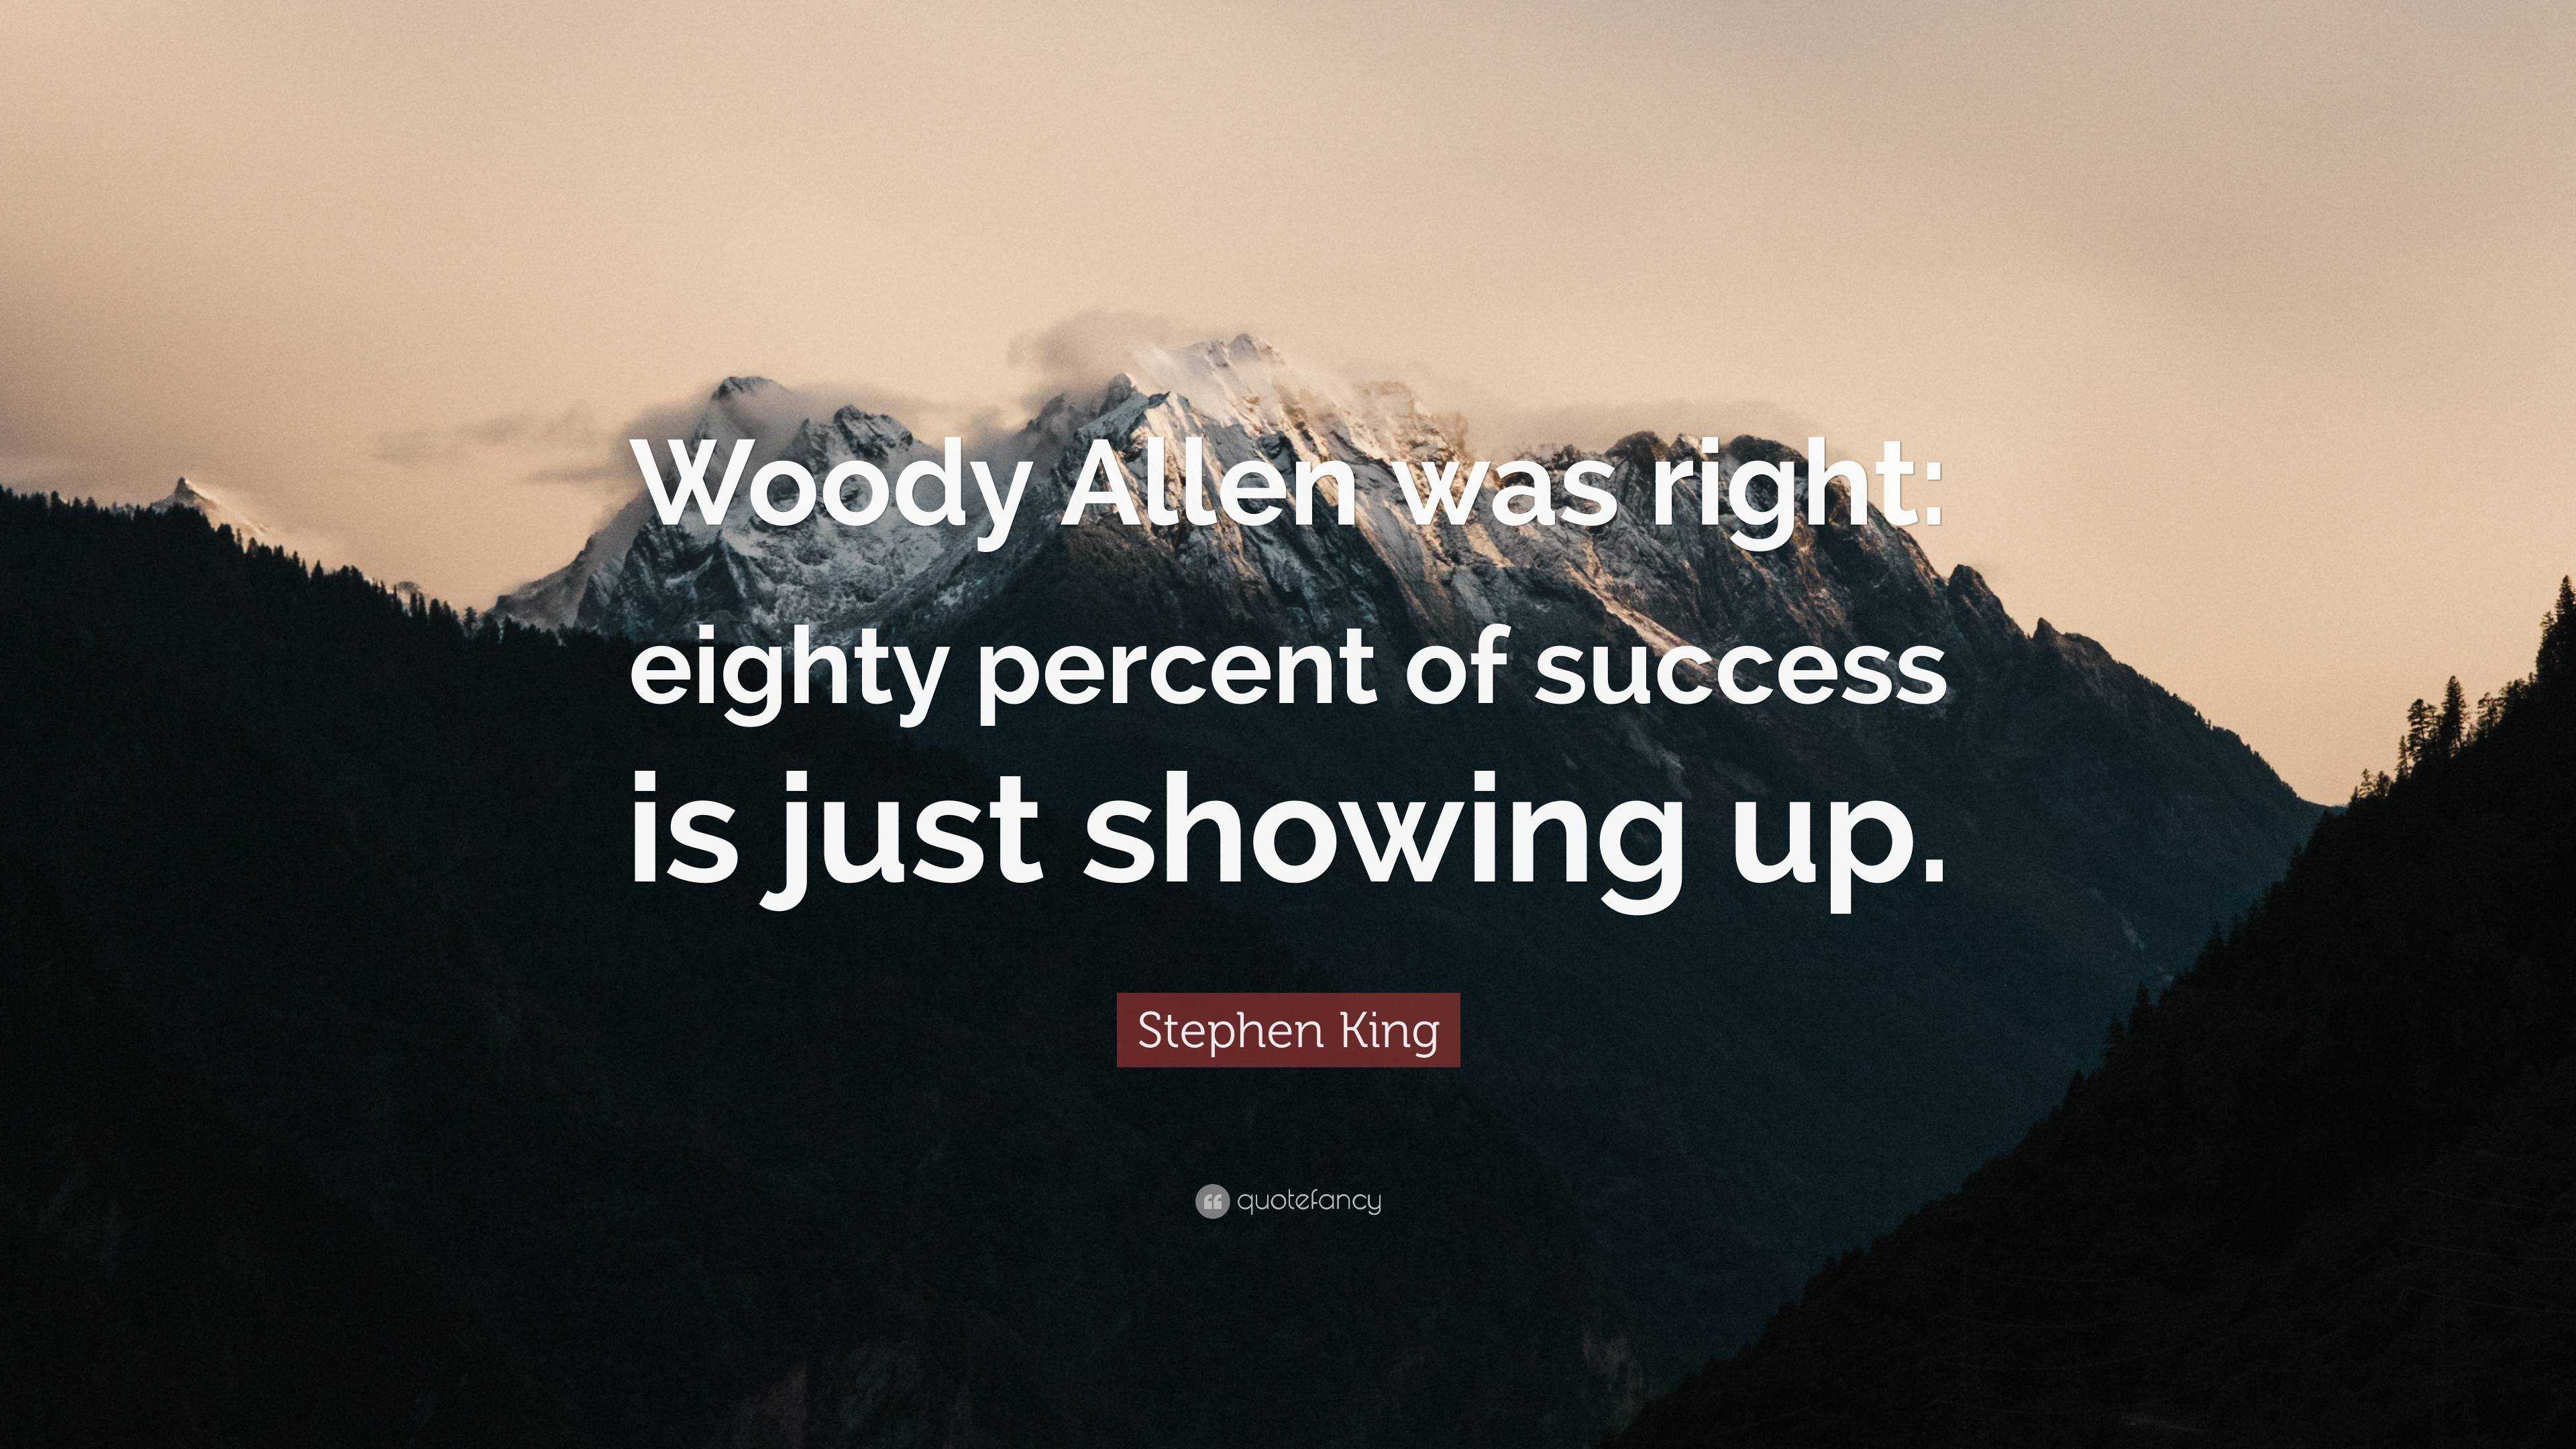 Stephen King Quote “woody Allen Was Right Eighty Percent Of Success Is Just Showing Up” 5777